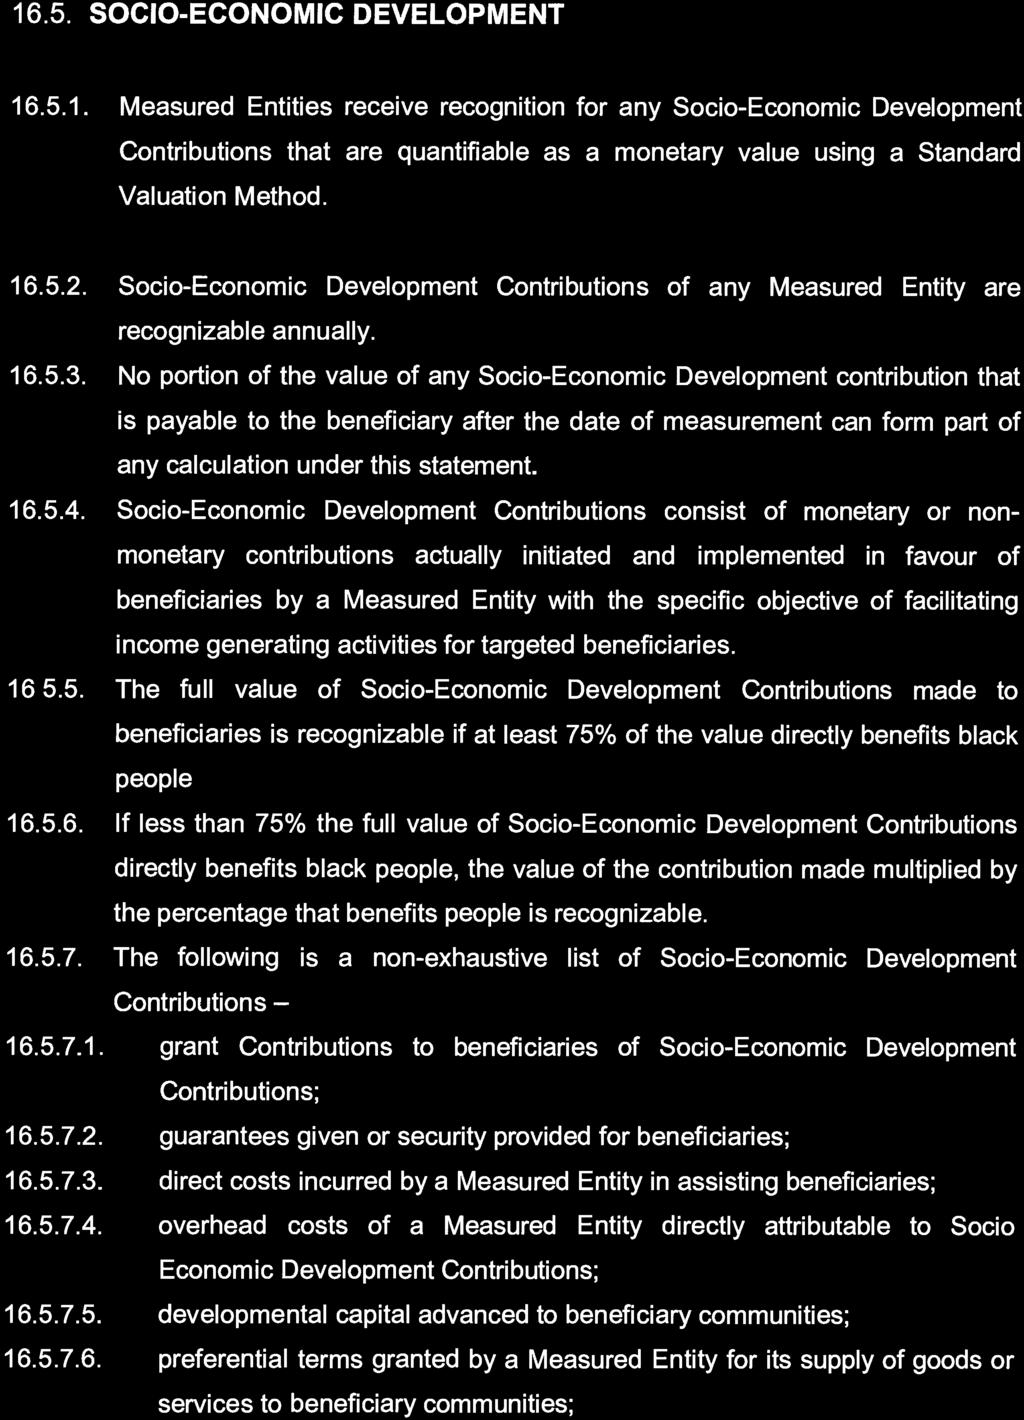 STAATSKOERANT, 4 AUGUSTUS 2017 No. 41024 195 16.5. SOCIO- ECONOMIC DEVELOPMENT 16.5.1. Measured Entities receive recognition for any Socio- Economic Development Contributions that are quantifiable as a monetary value using a Standard Valuation Method.